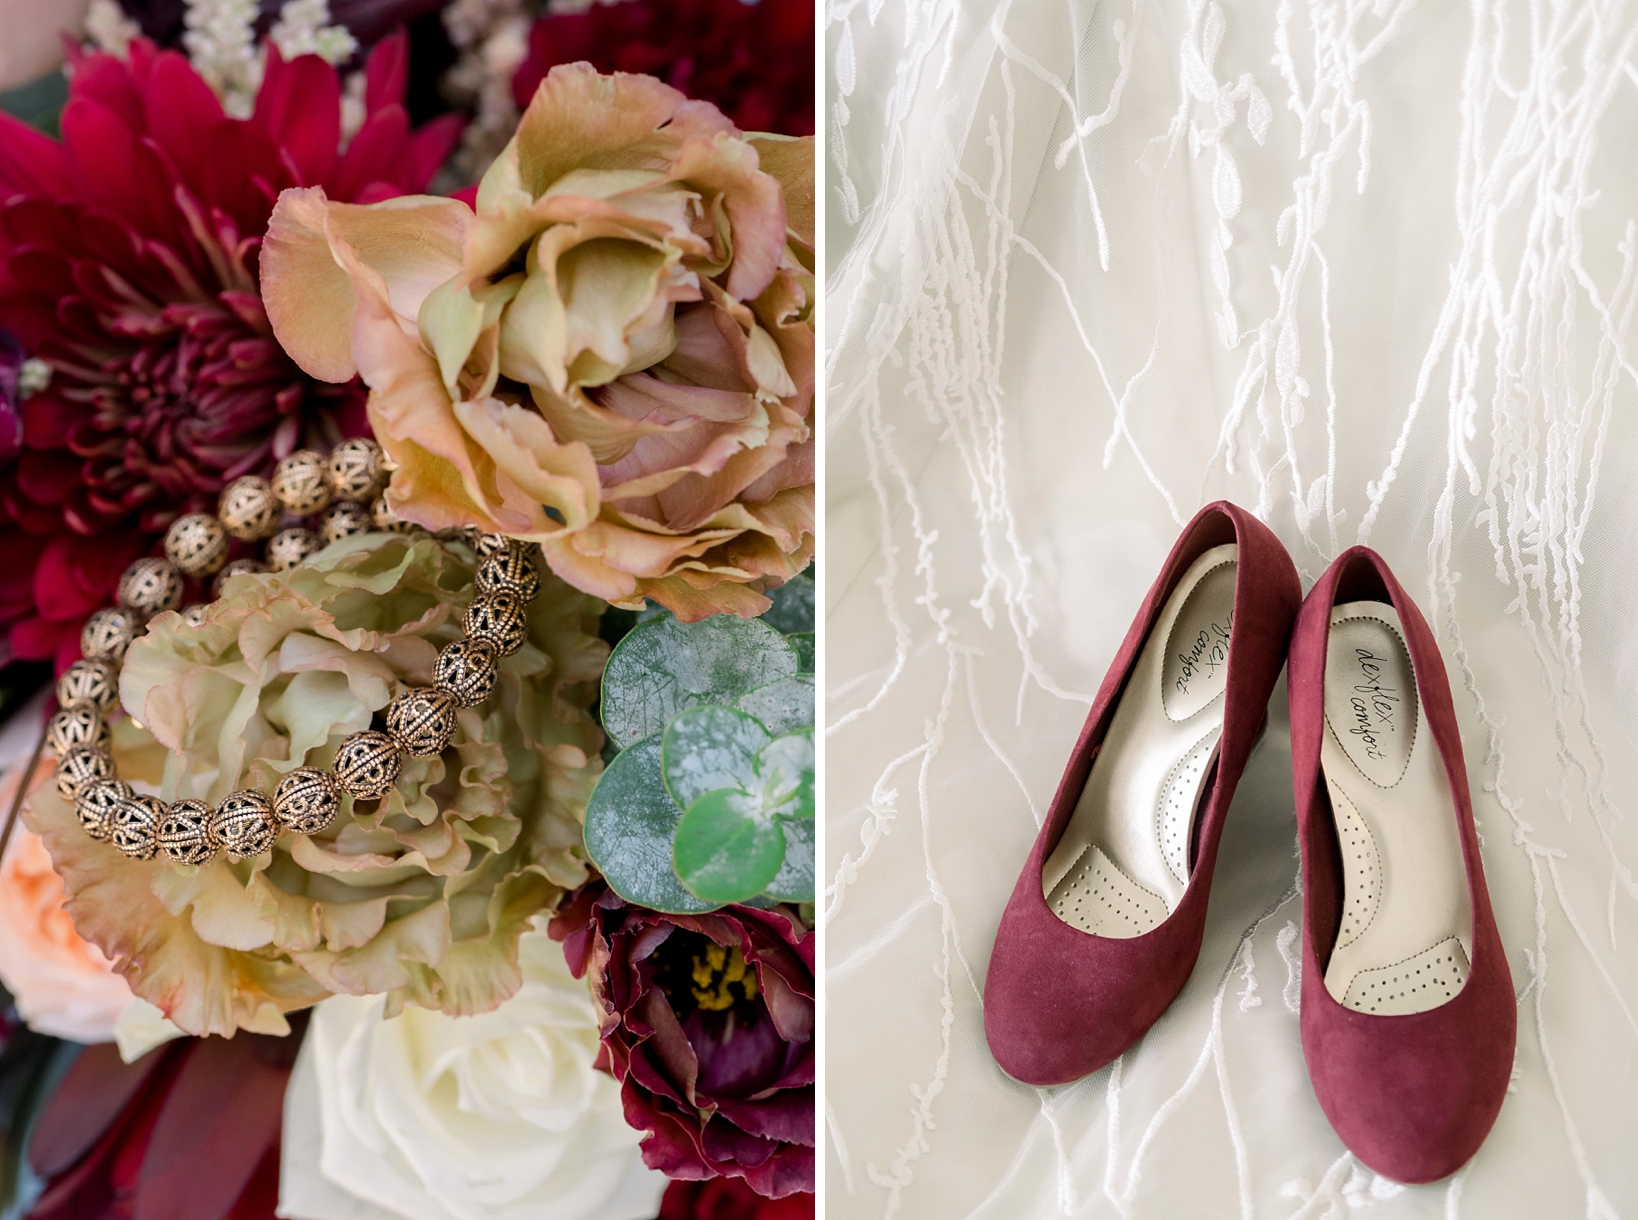 The bride's red wedding shoes against the lace of her wedding dress and a close up of her bracelet